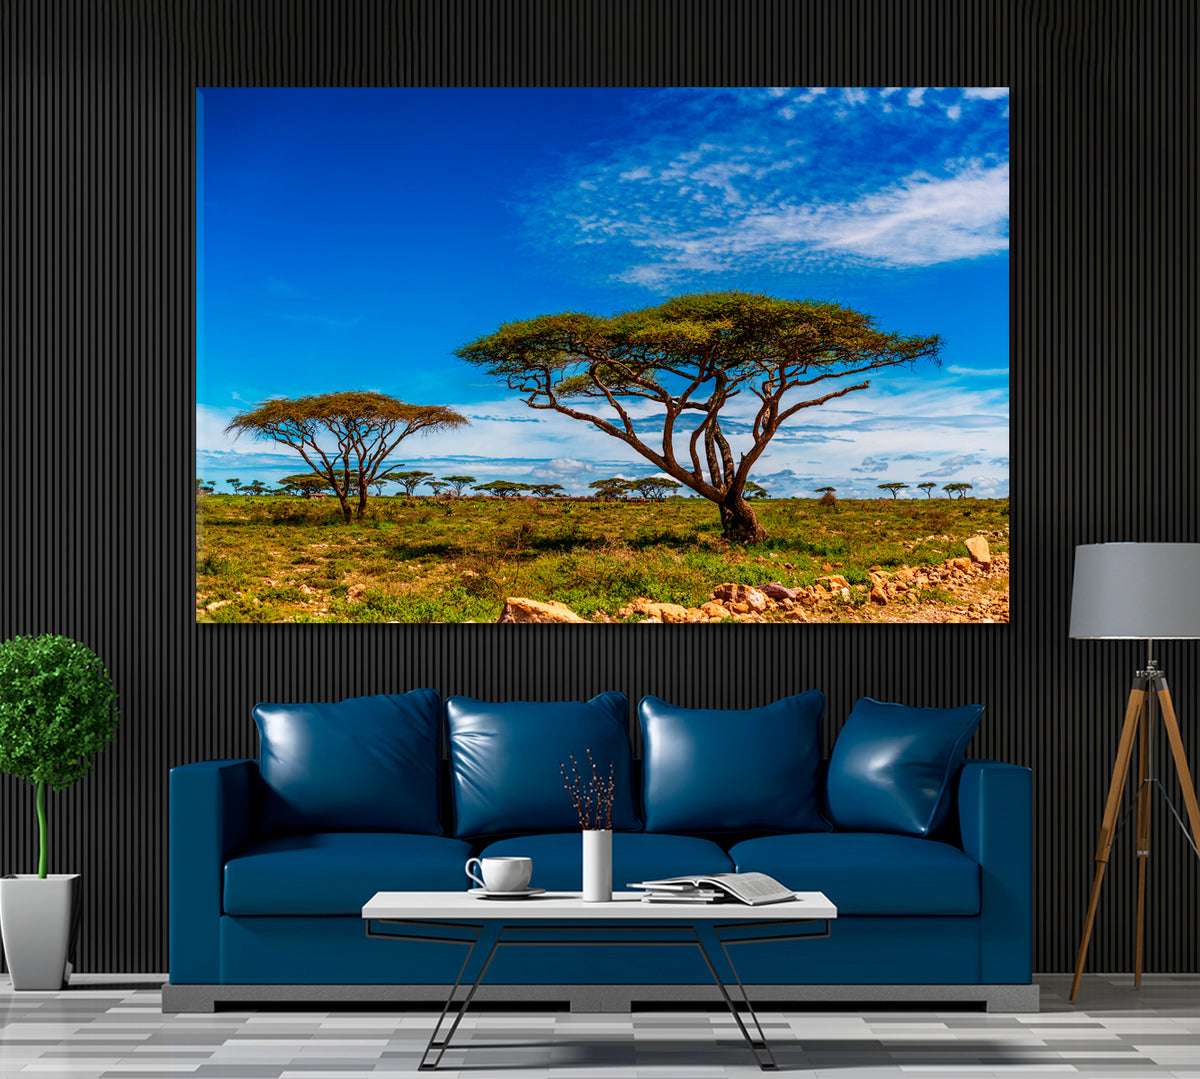 Ngorongoro Conservation Area. African Landscape Canvas Print ArtLexy 1 Panel 24"x16" inches 